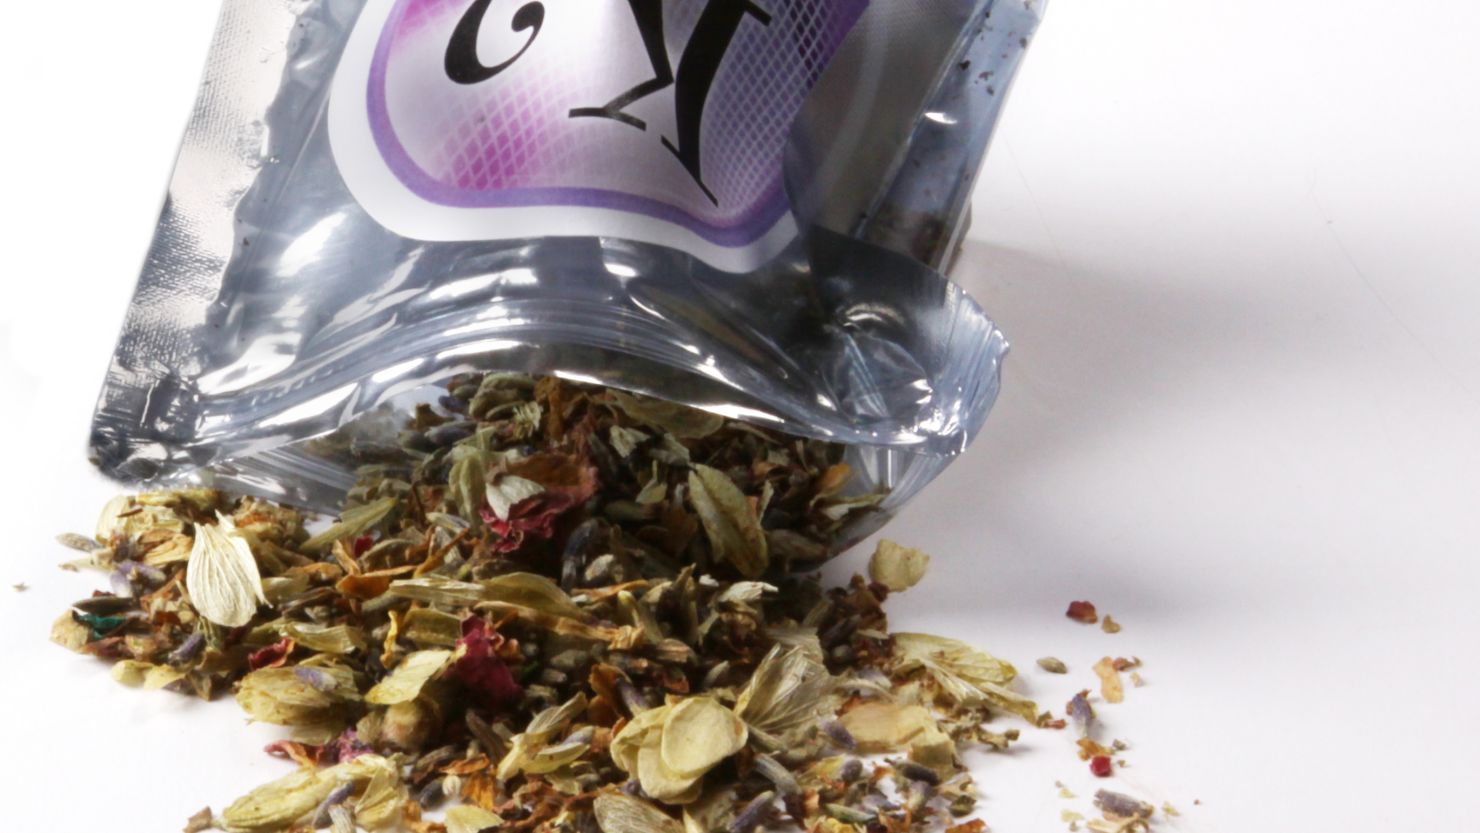 Synthetic cannabinoid can be 100 times more potent than THC, a CDC report said.